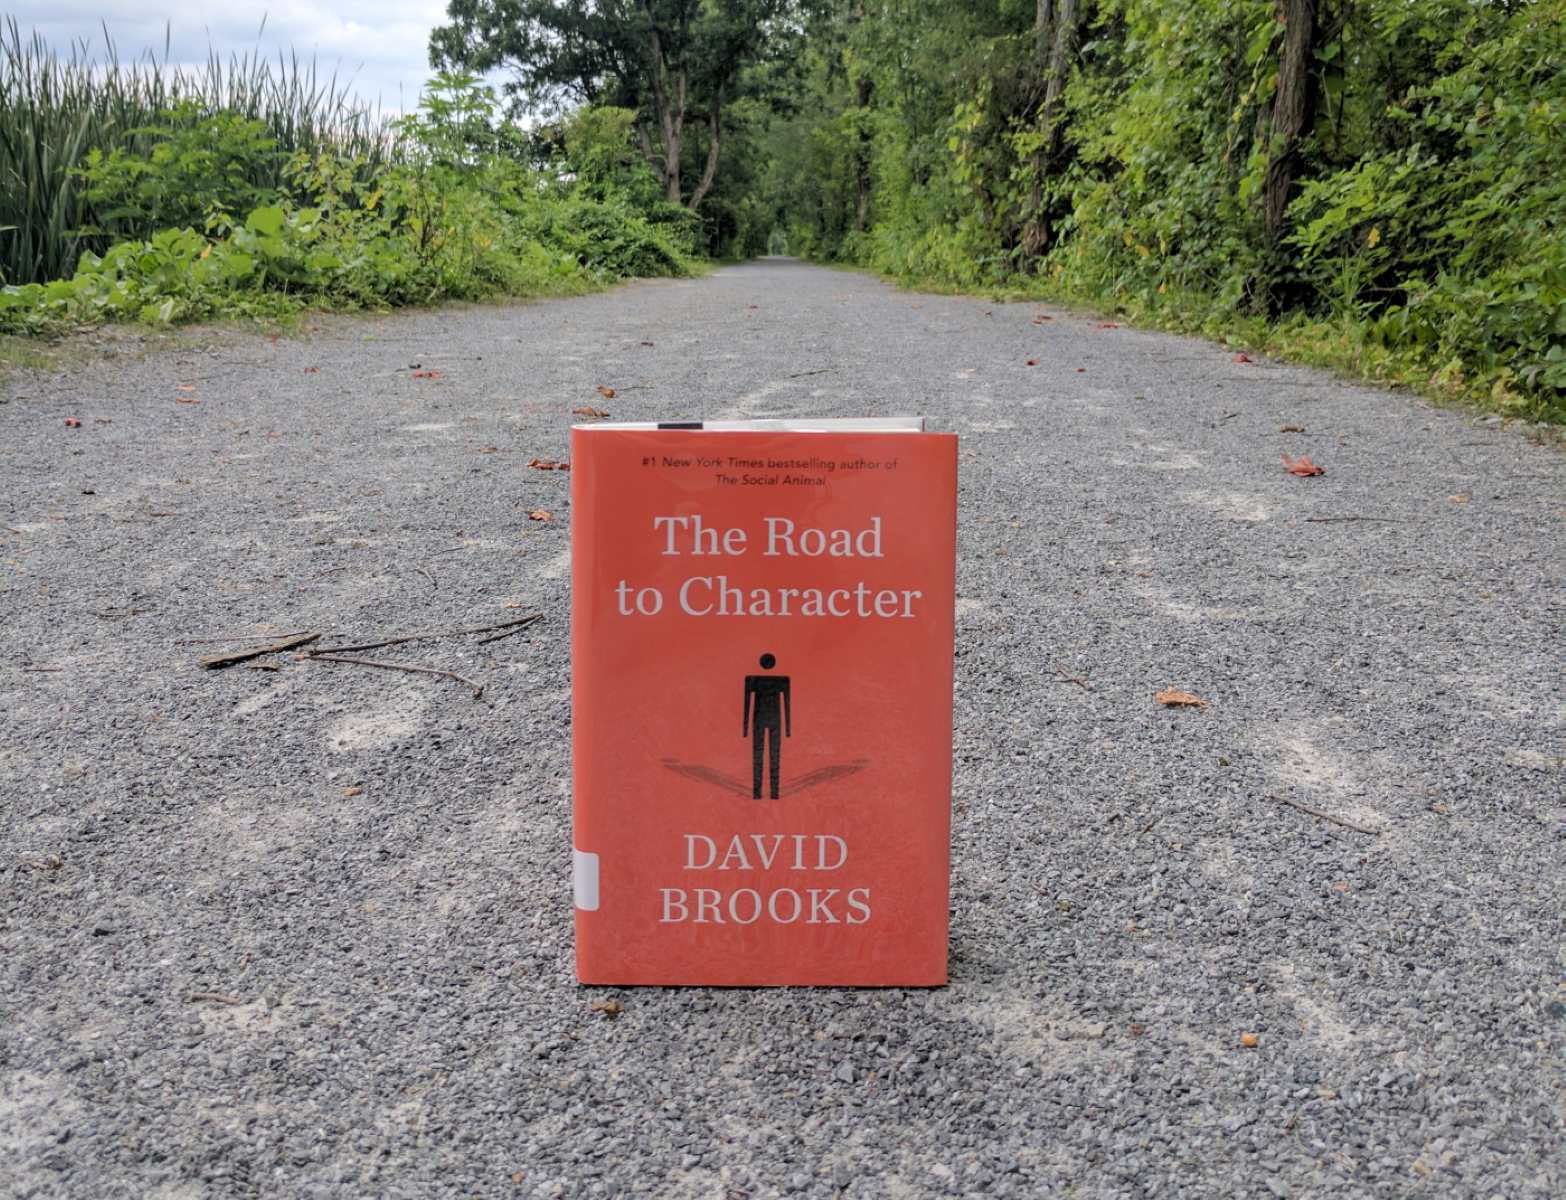 18-fascinating-facts-about-the-road-to-character-david-brooks